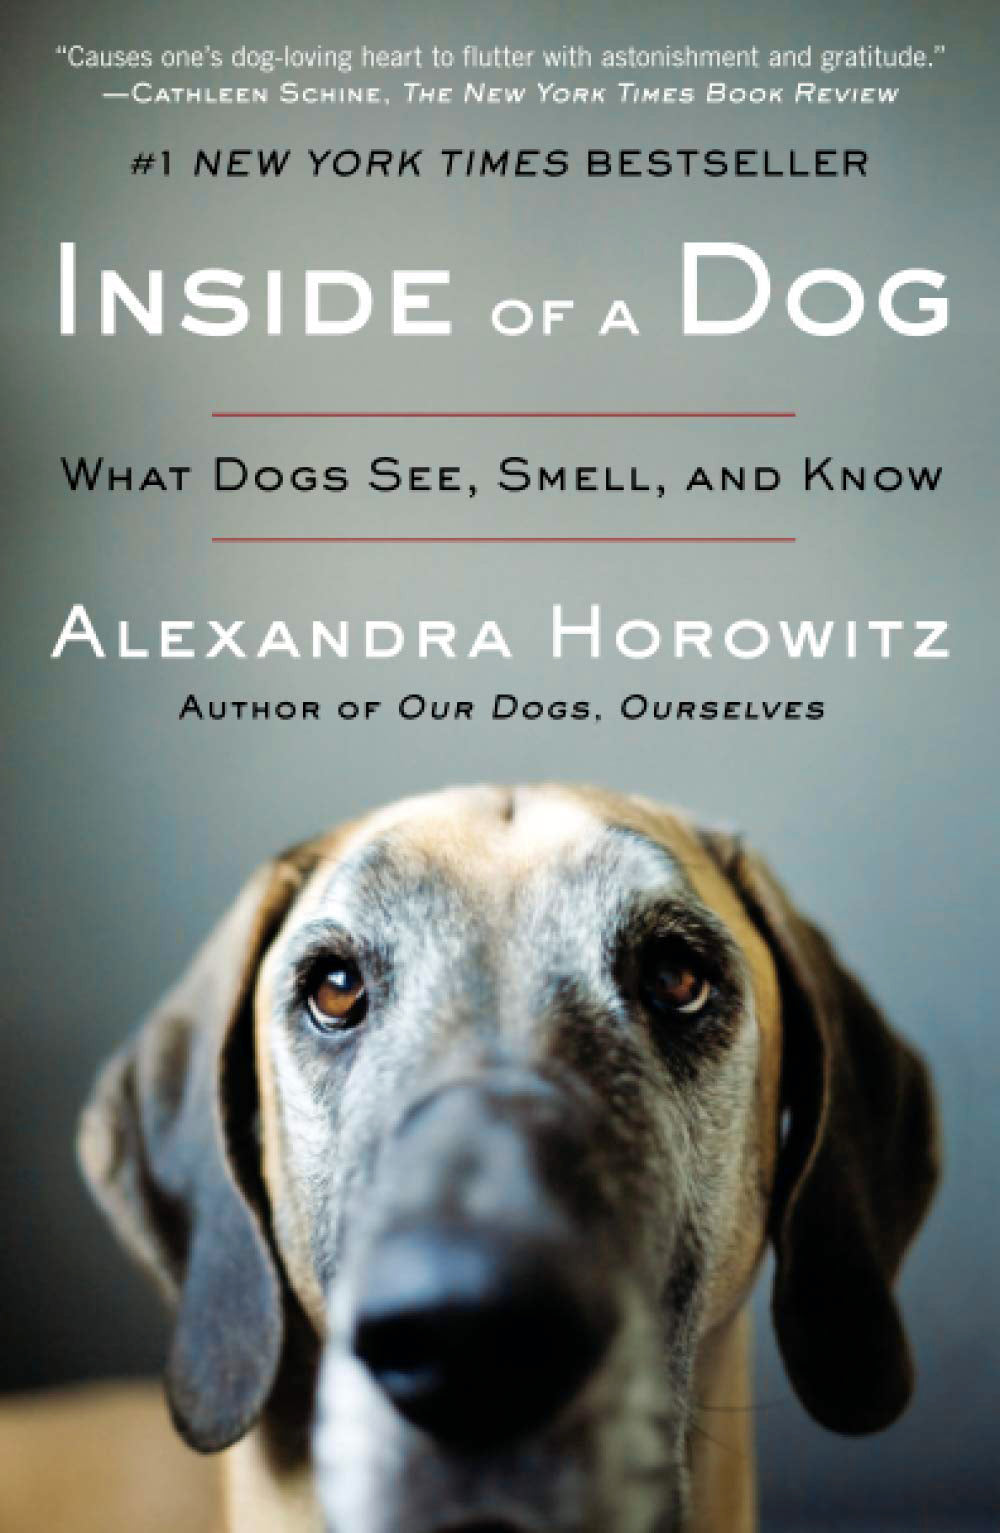 Inside of a Dog: What Dogs See, Smell, and Know by Alexandra Horowitz / Paperback - NEW BOOK OR BOOK BOX